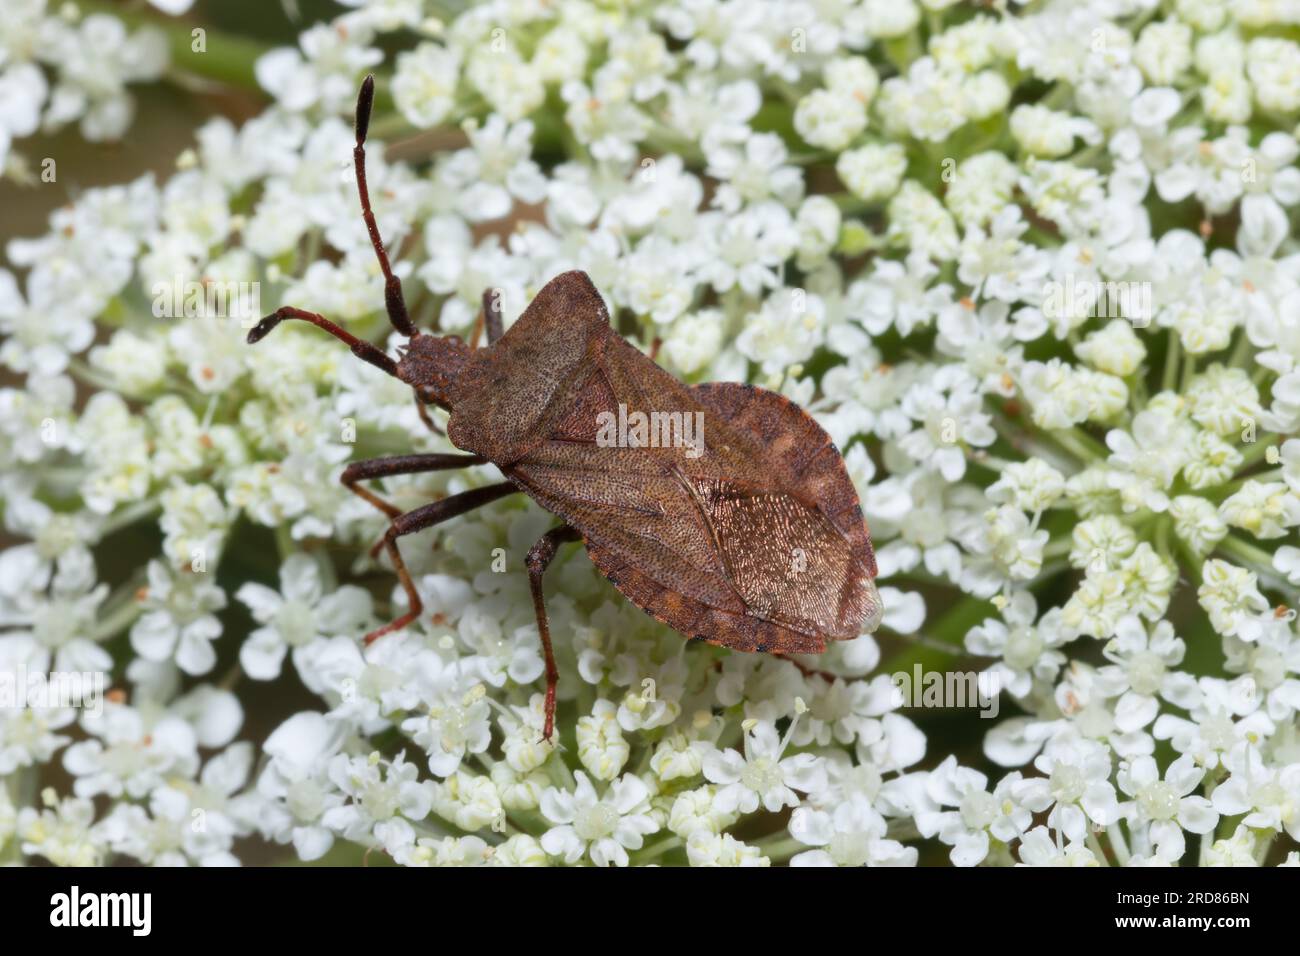 Coreus marginatus, commonly known as the dock bug, resting on white flowers. Stock Photo